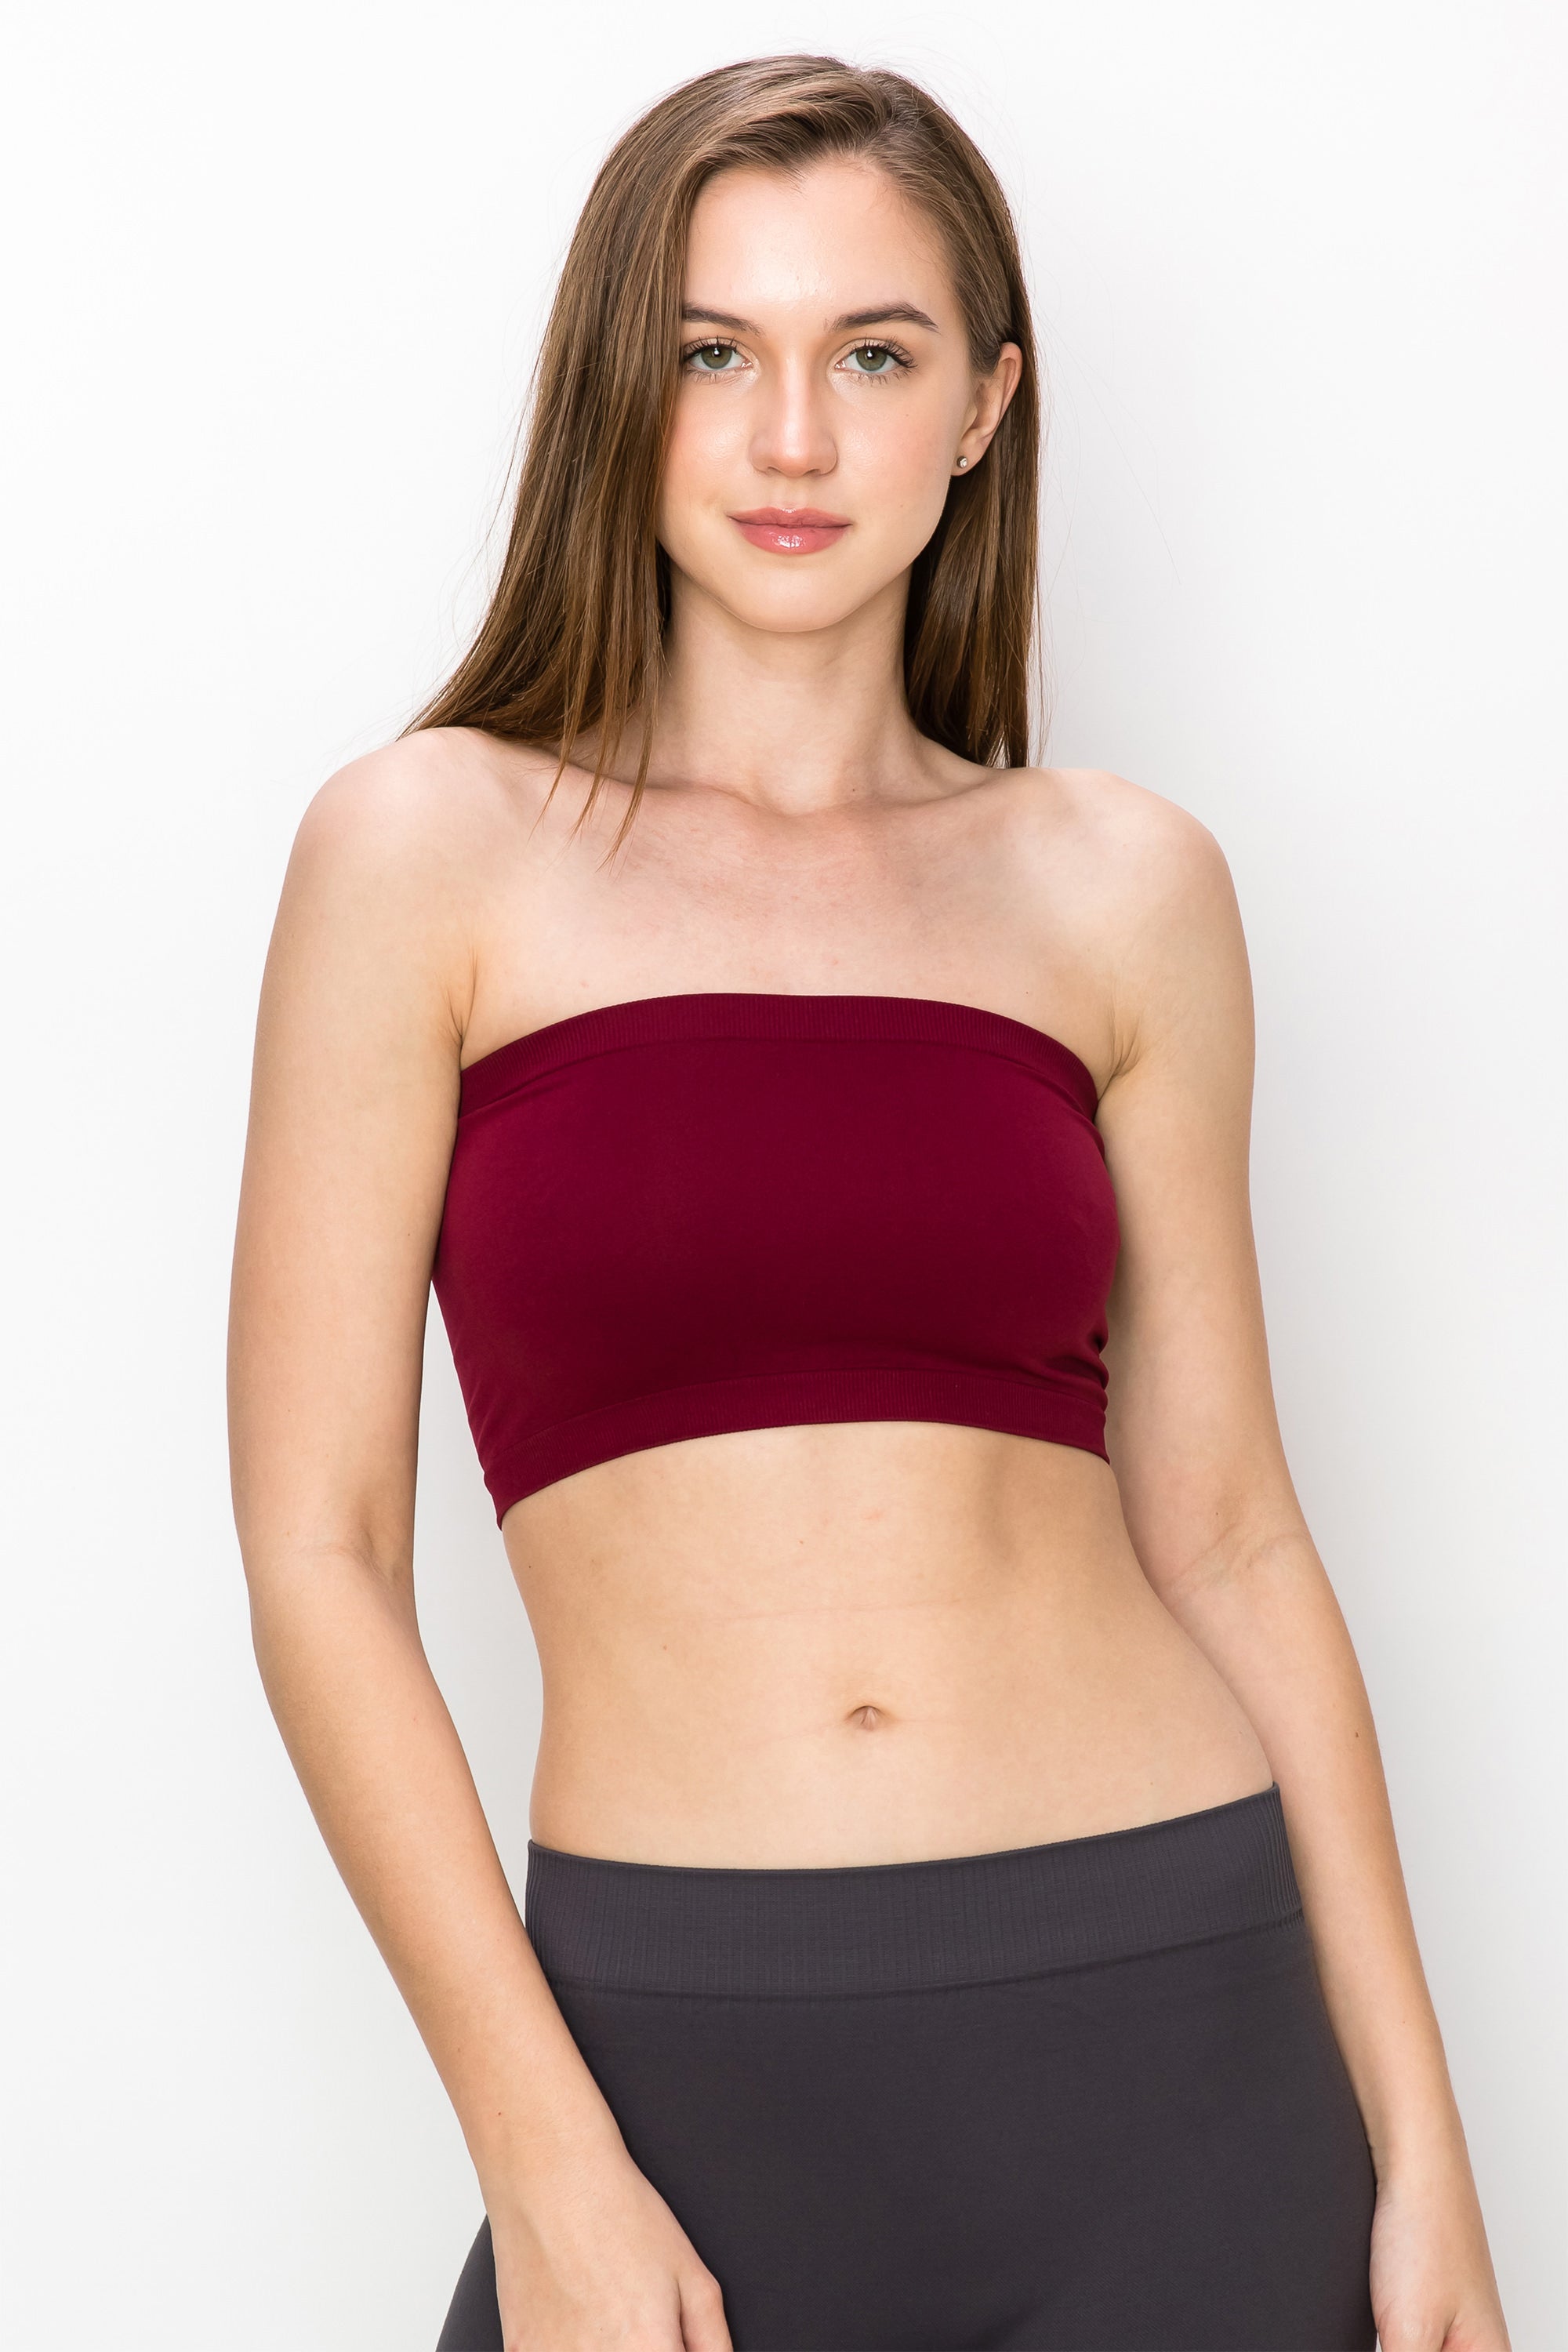 Seamless Tube Top Bra Non Wire Lingerie For Women: Comfortable, Sexy &  Supportive Perfect For Intimates From Tiangouu, $9.1